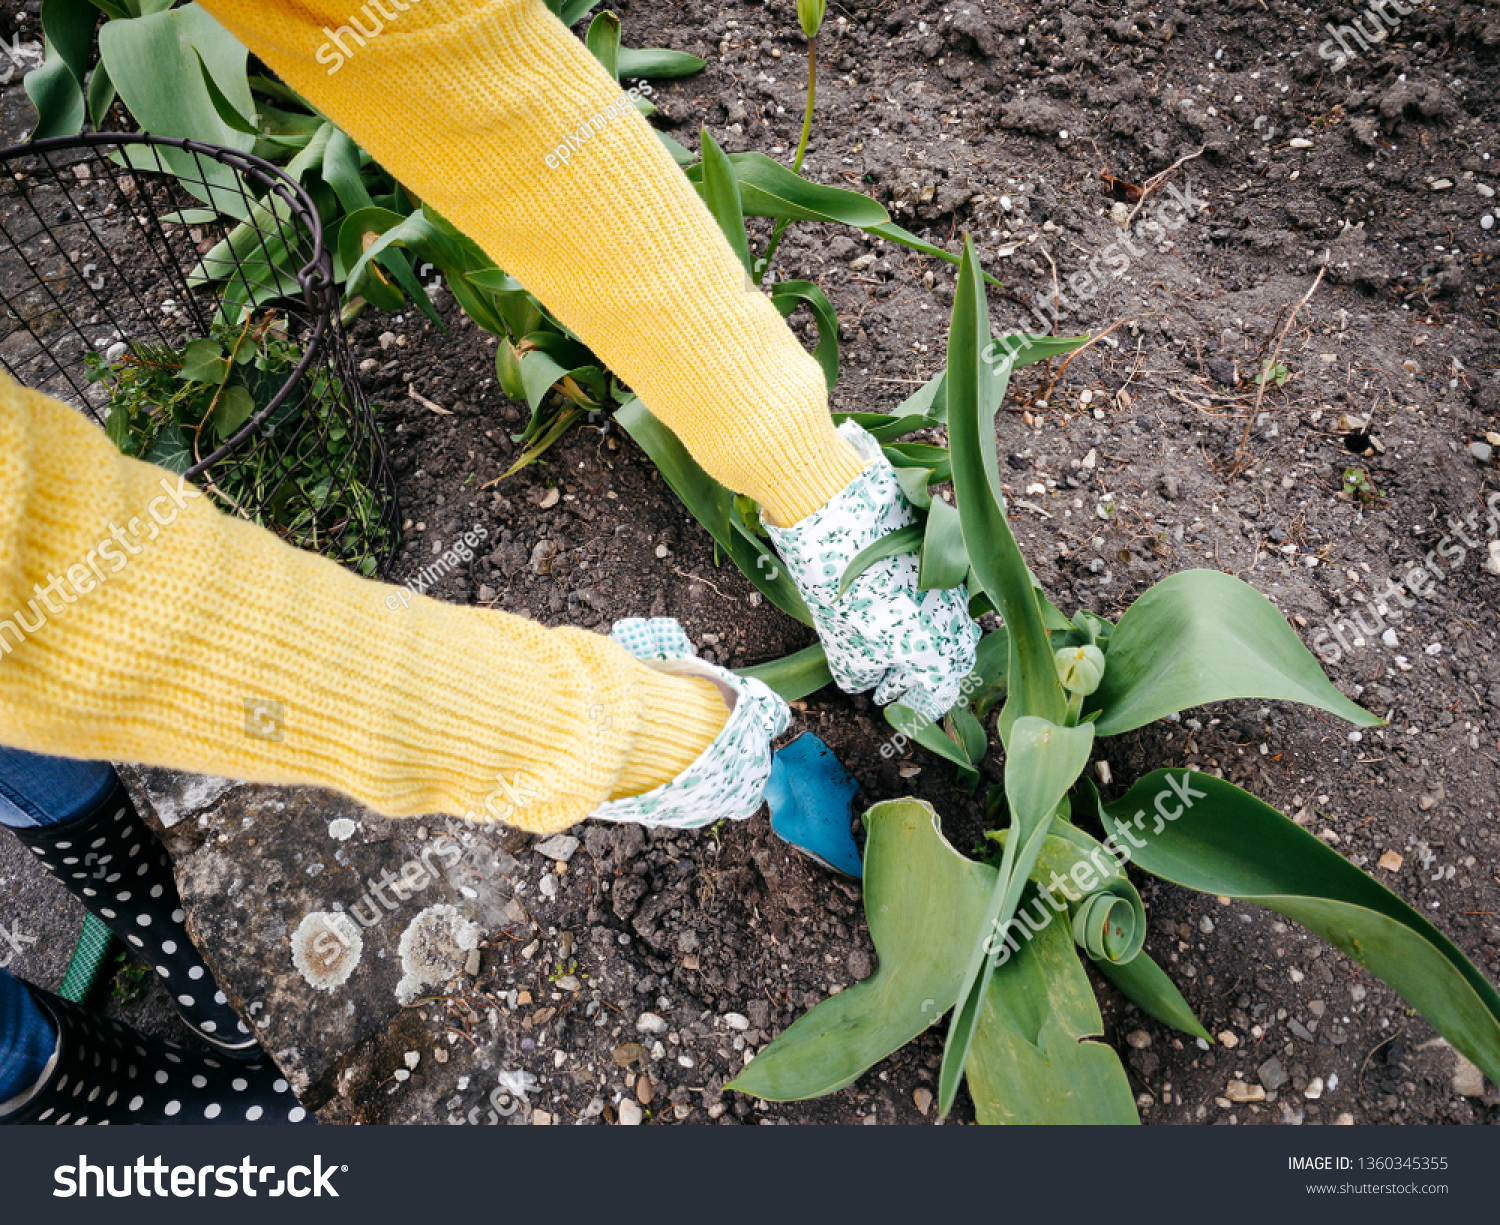 young pretty woman with yellow and glasses sweater weeding weeds #1360345355